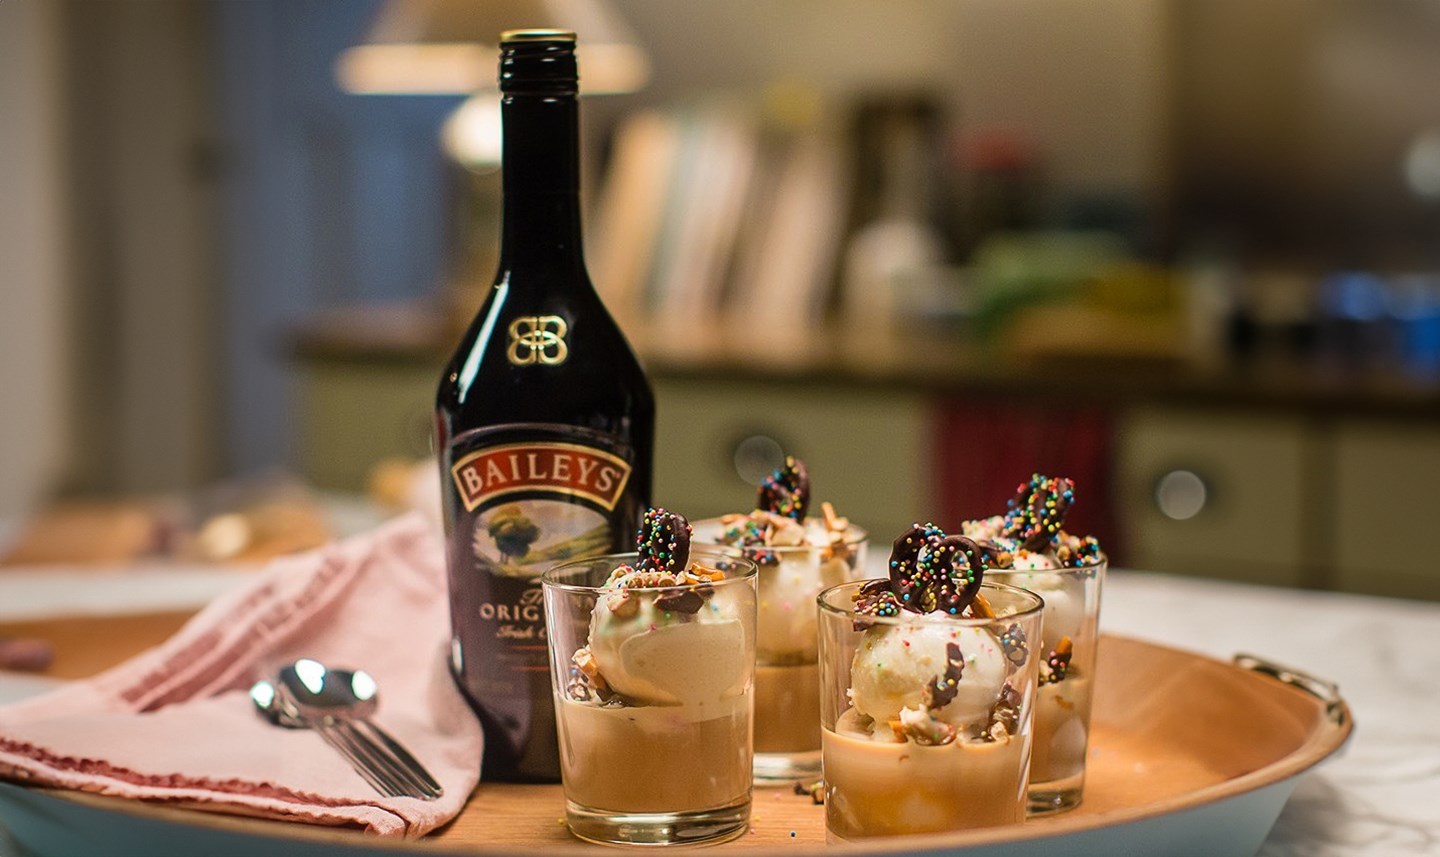 What goes well with Baileys: 5 easy recipes to try at home hero image